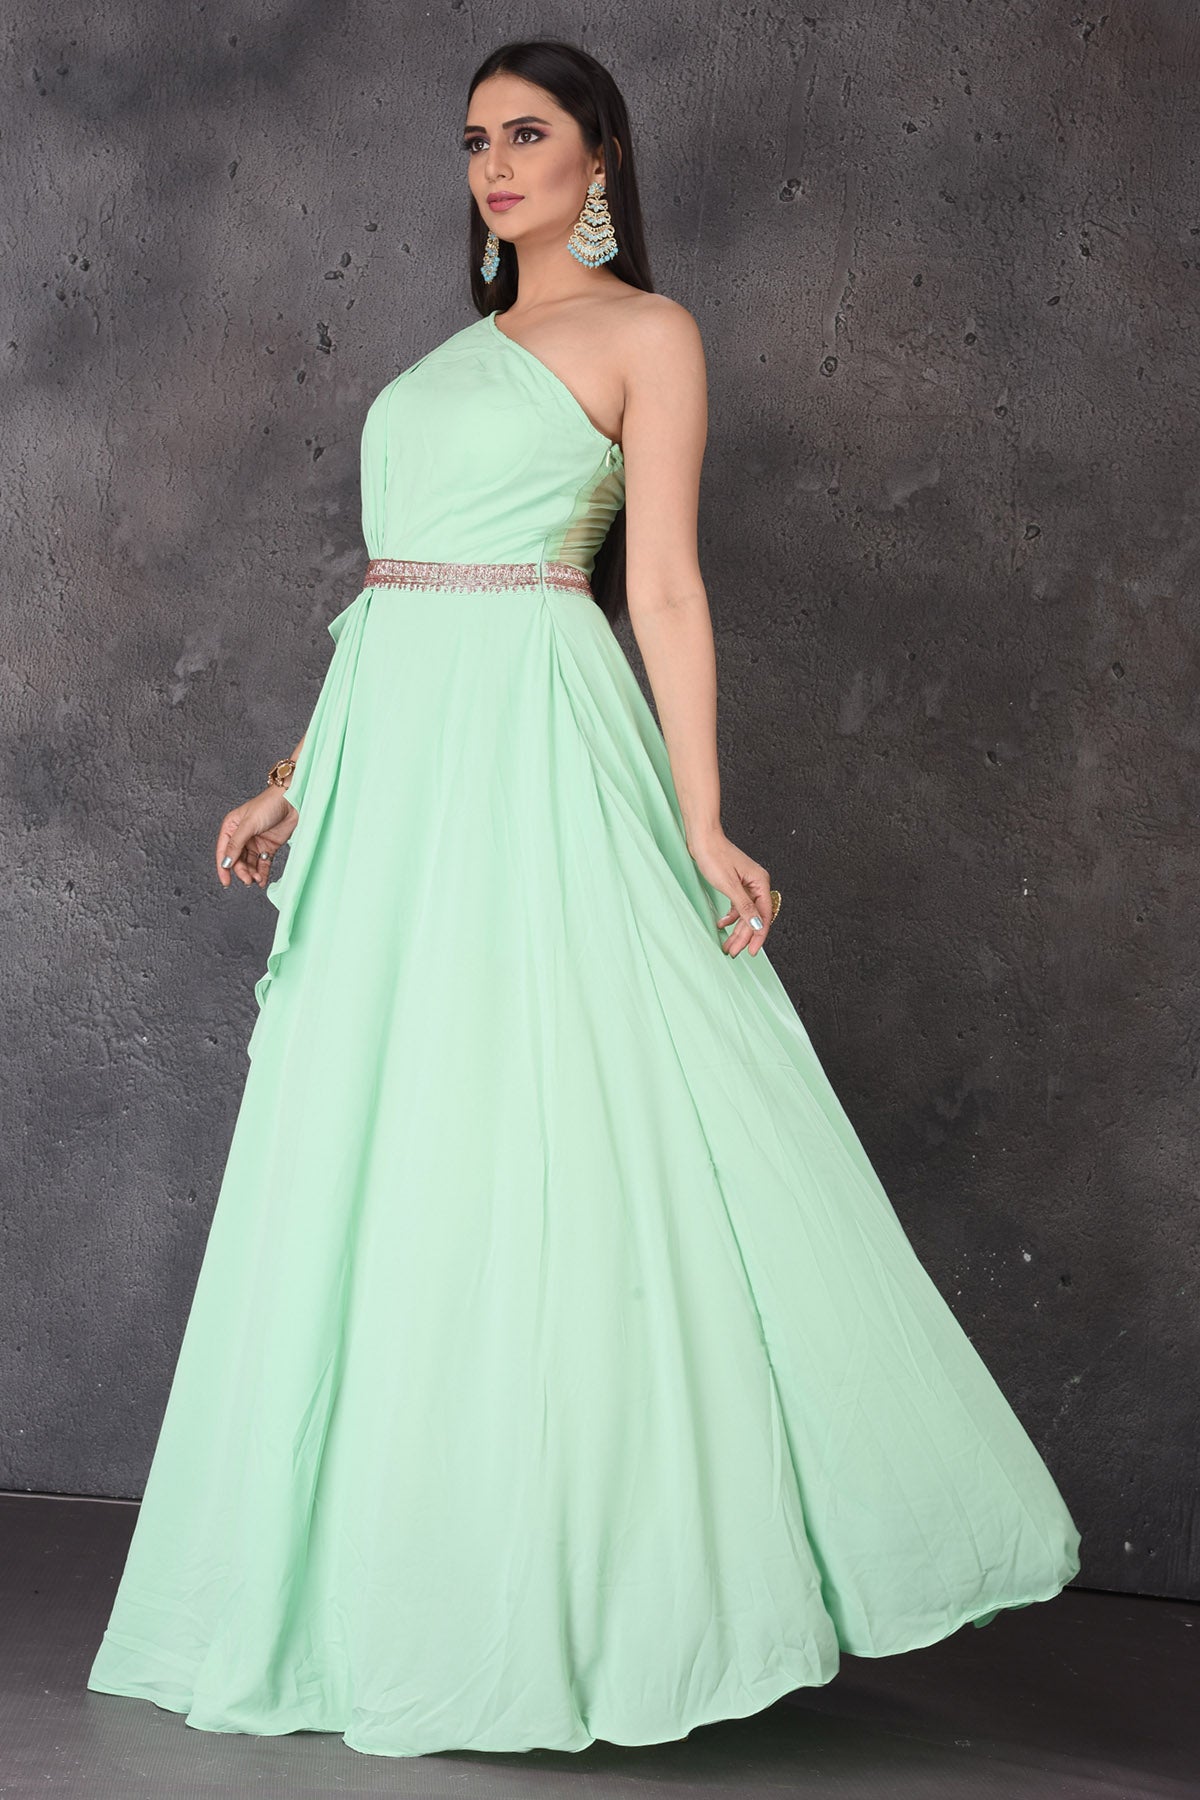 Blue Fantasy Prom Gown with Off-shoulder Design And Gradient Effect -  $162.992 #V78053 - SheProm.com